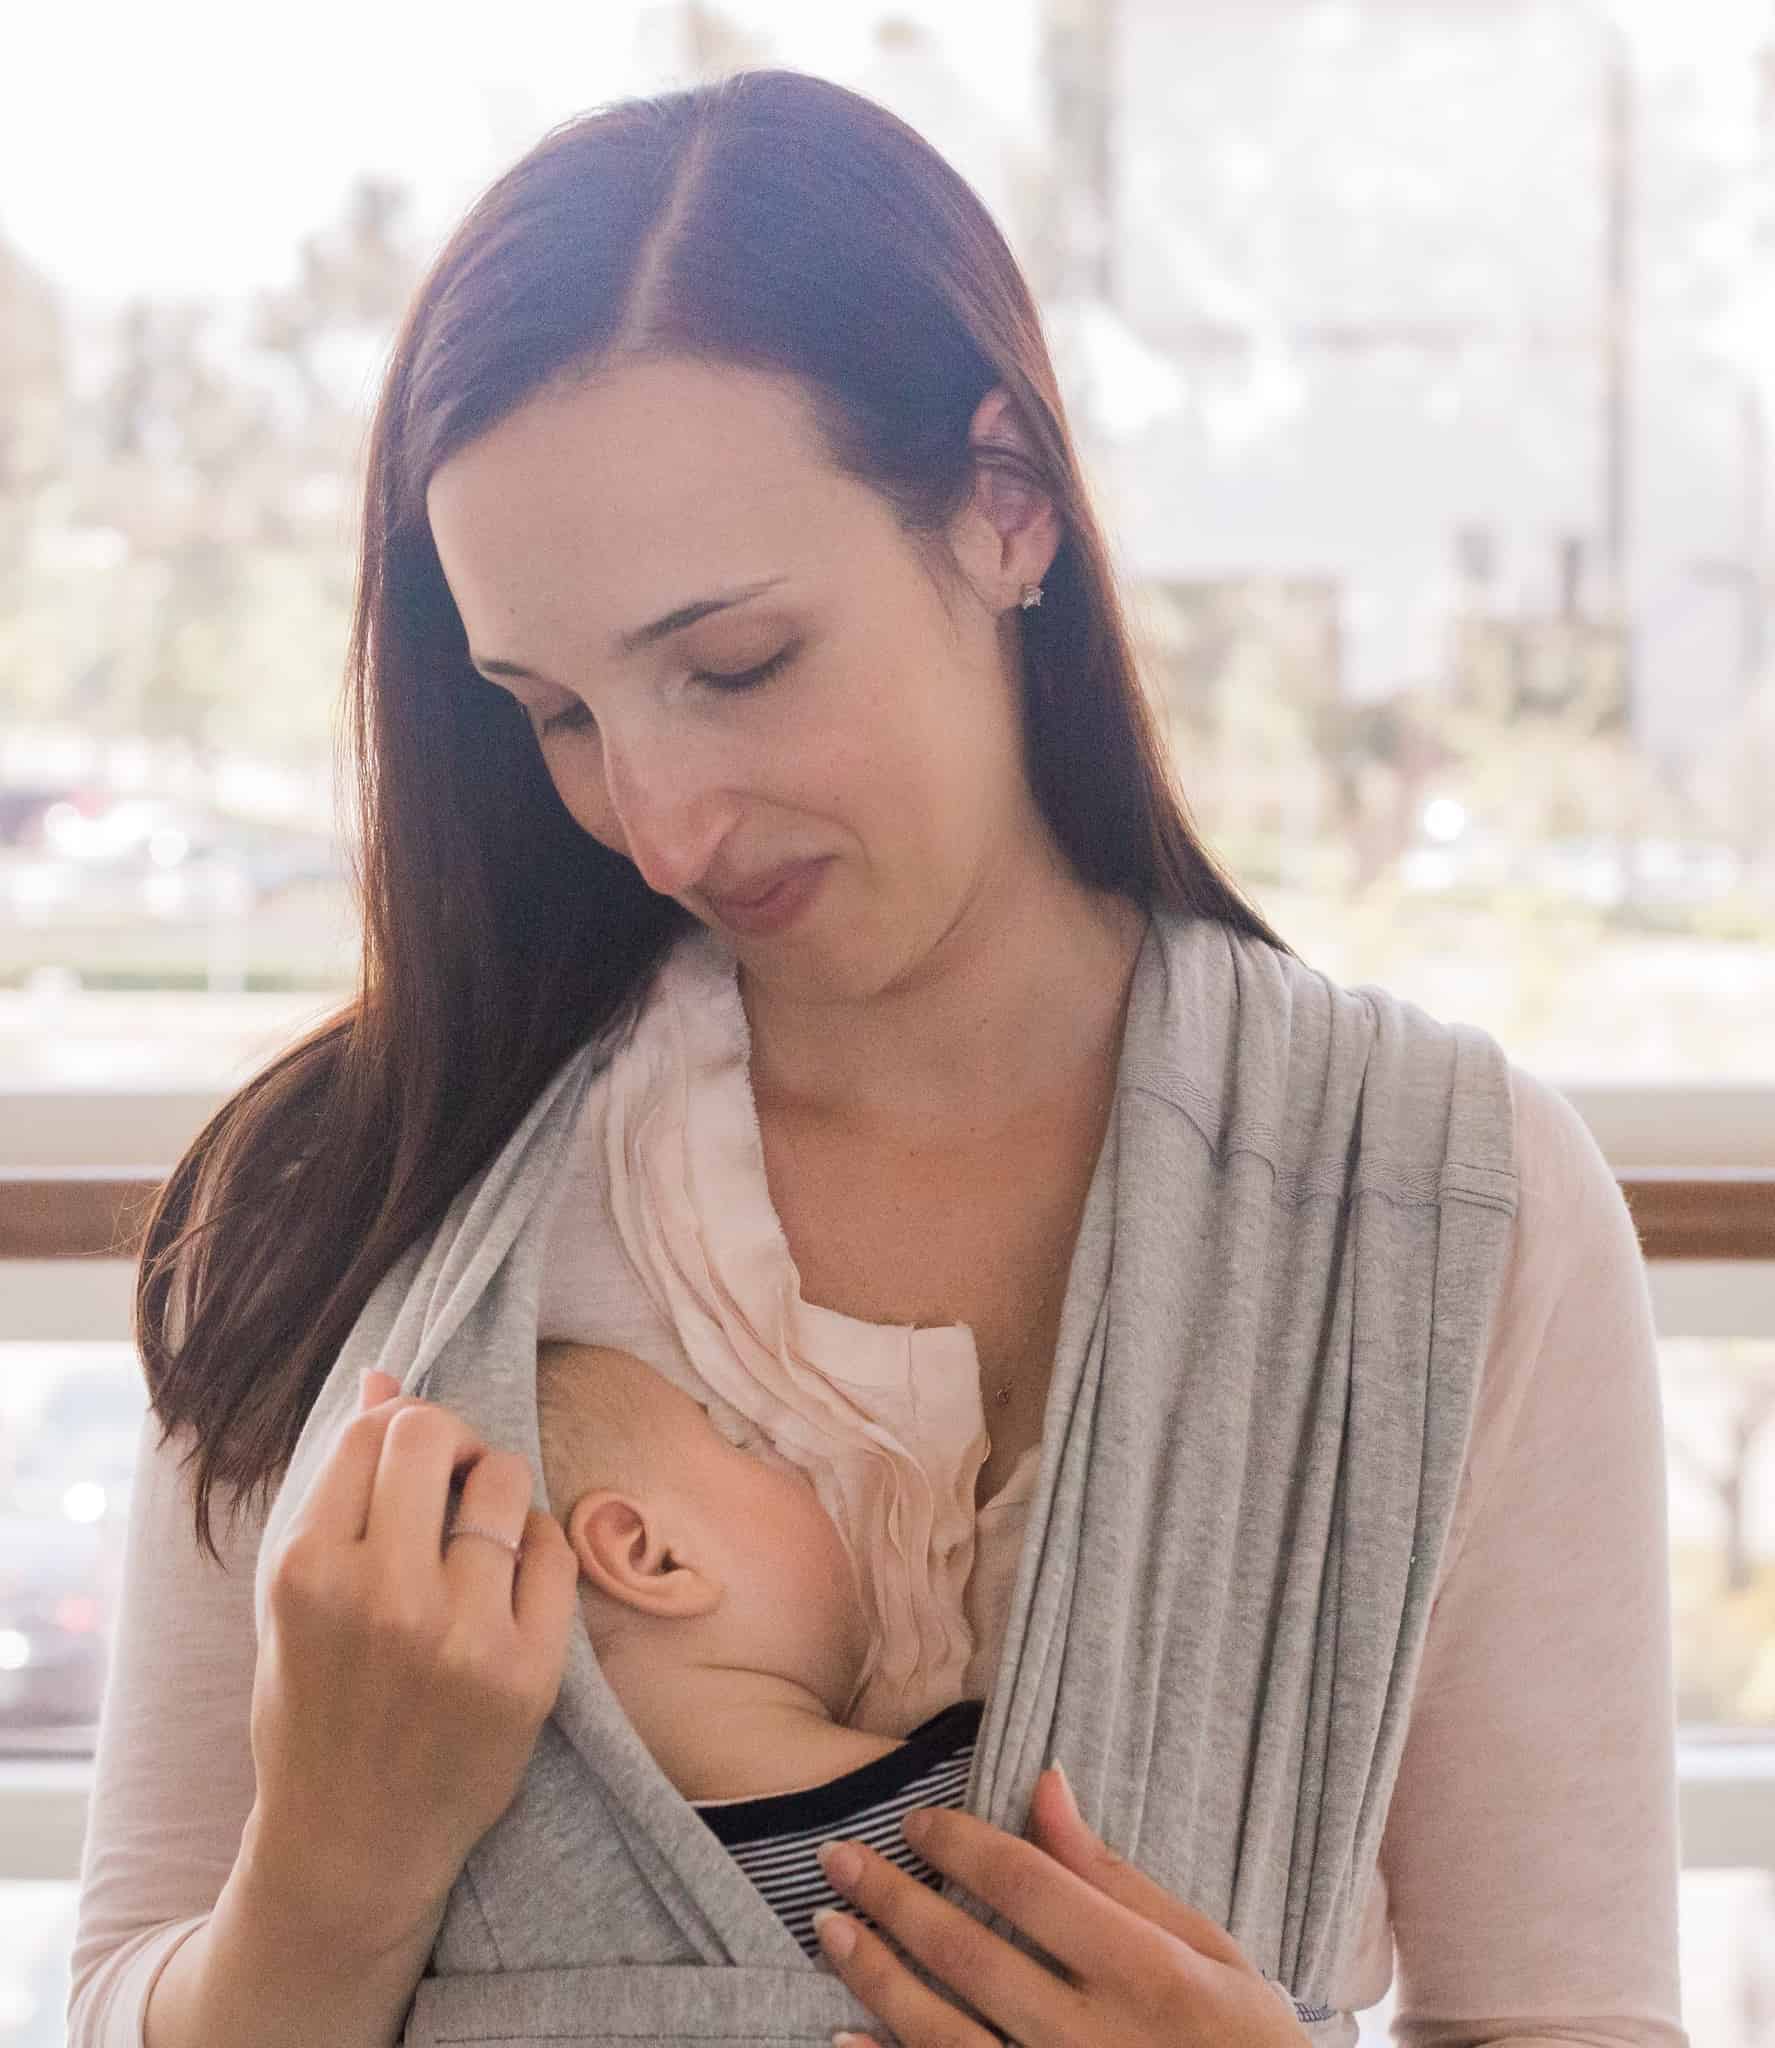 New mom with baby in baby carrier.